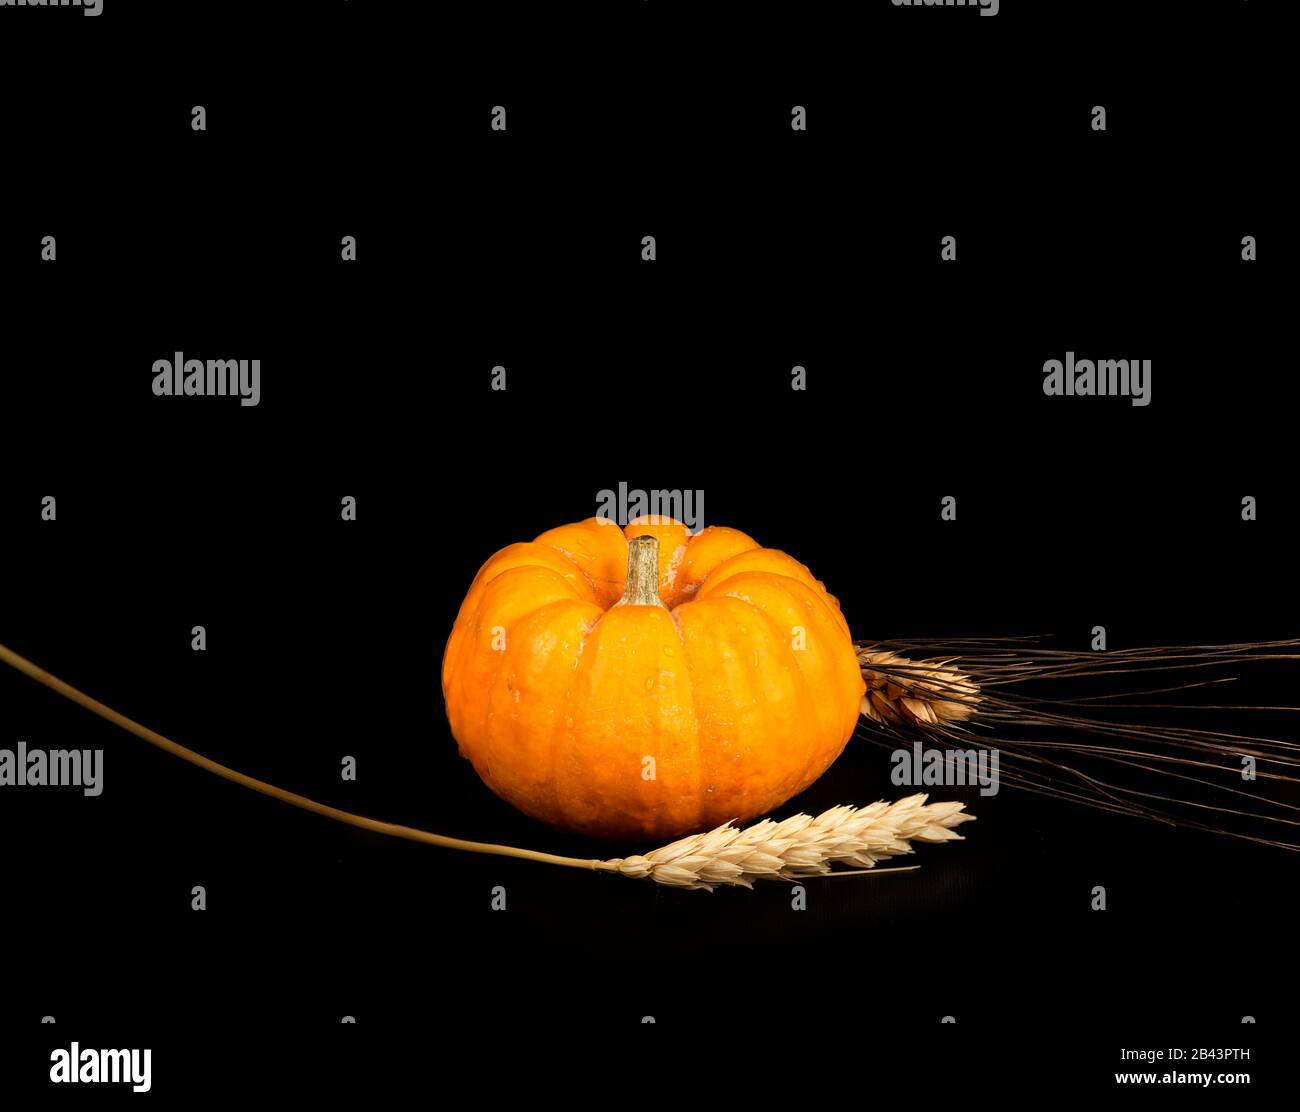 A small pumpkin with water droplets shot against a black background Stock Photo